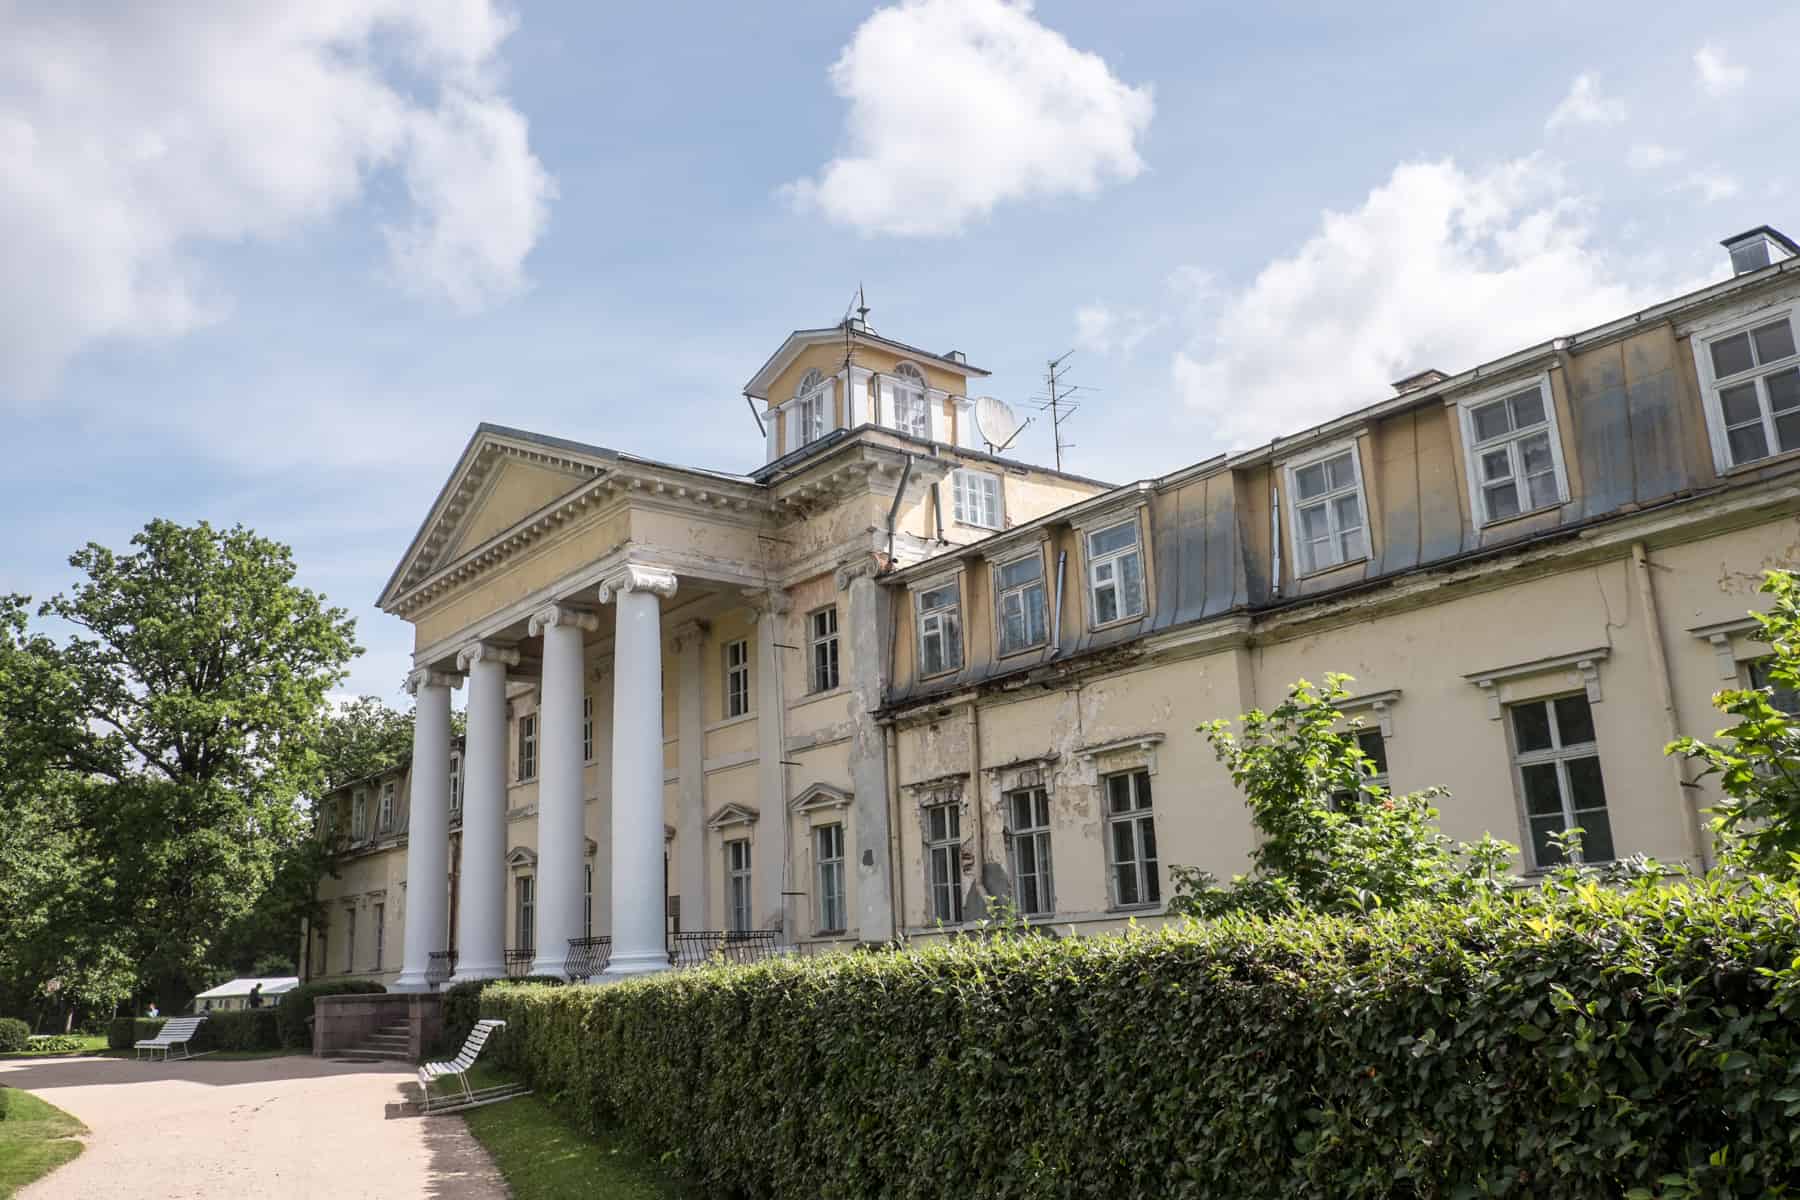 Krimulda Manor in Sigulda - a yellow neo-classical style building with white columns at the entrance, surrounded by manicured green hedges